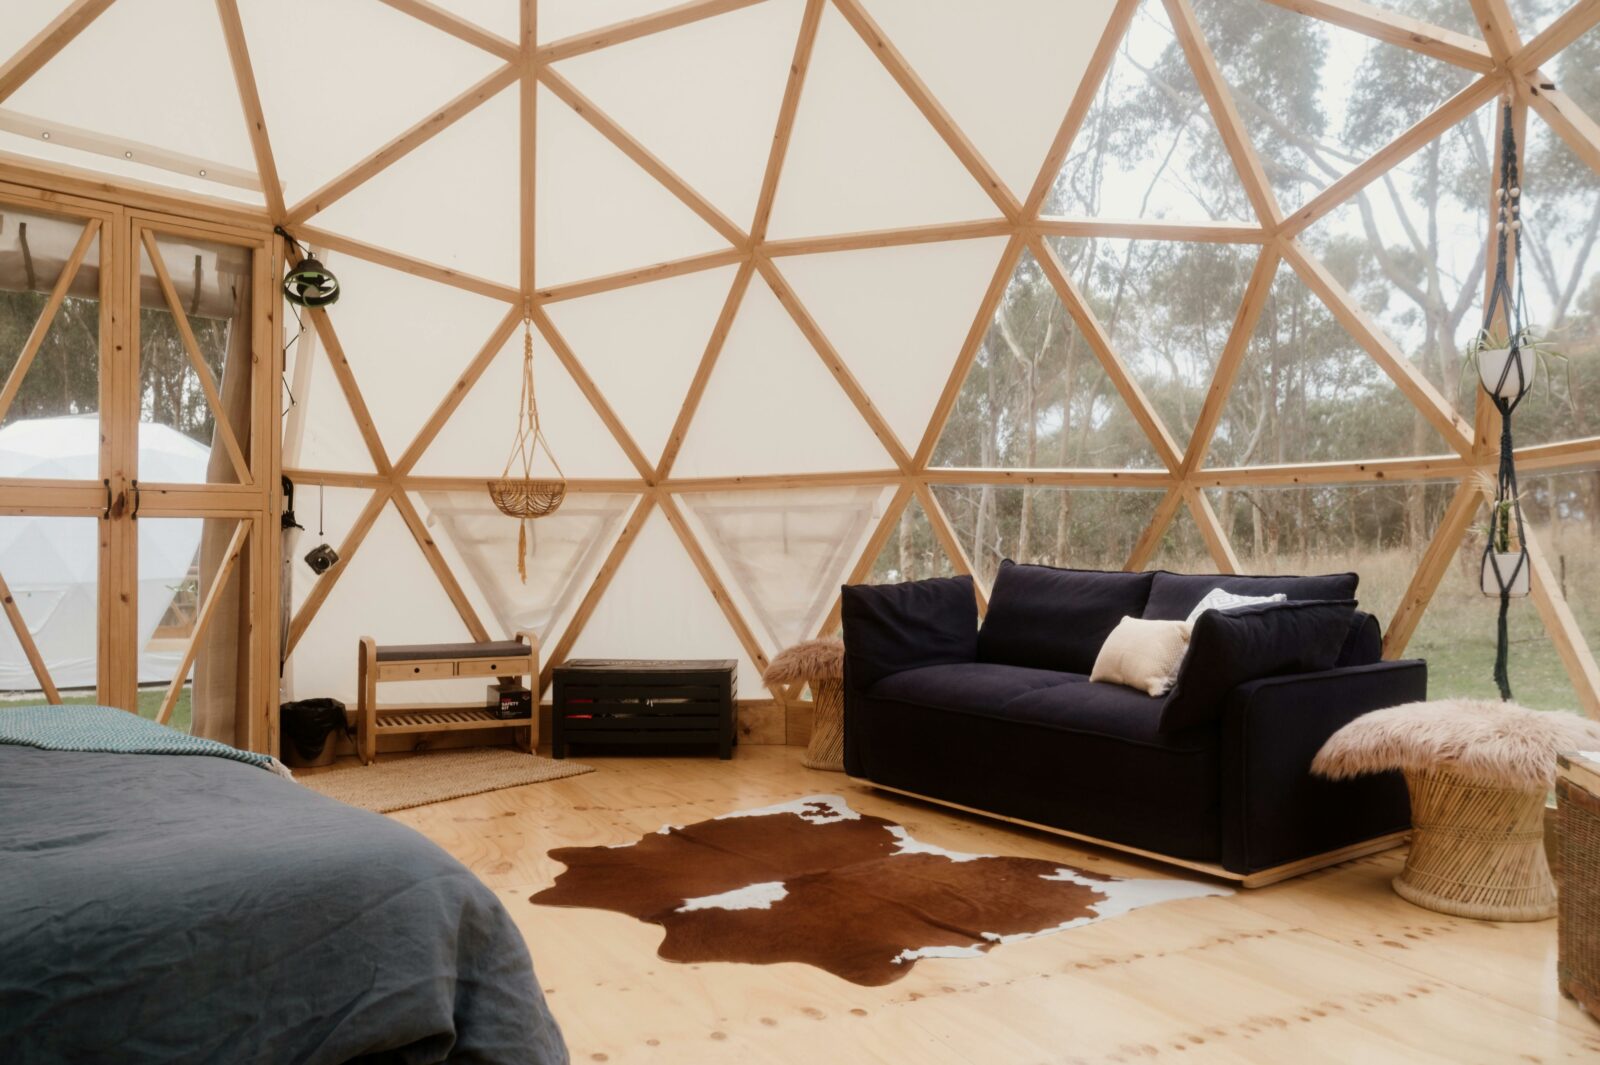 The Dome also includes a queen size pull out Koala sofa bed.